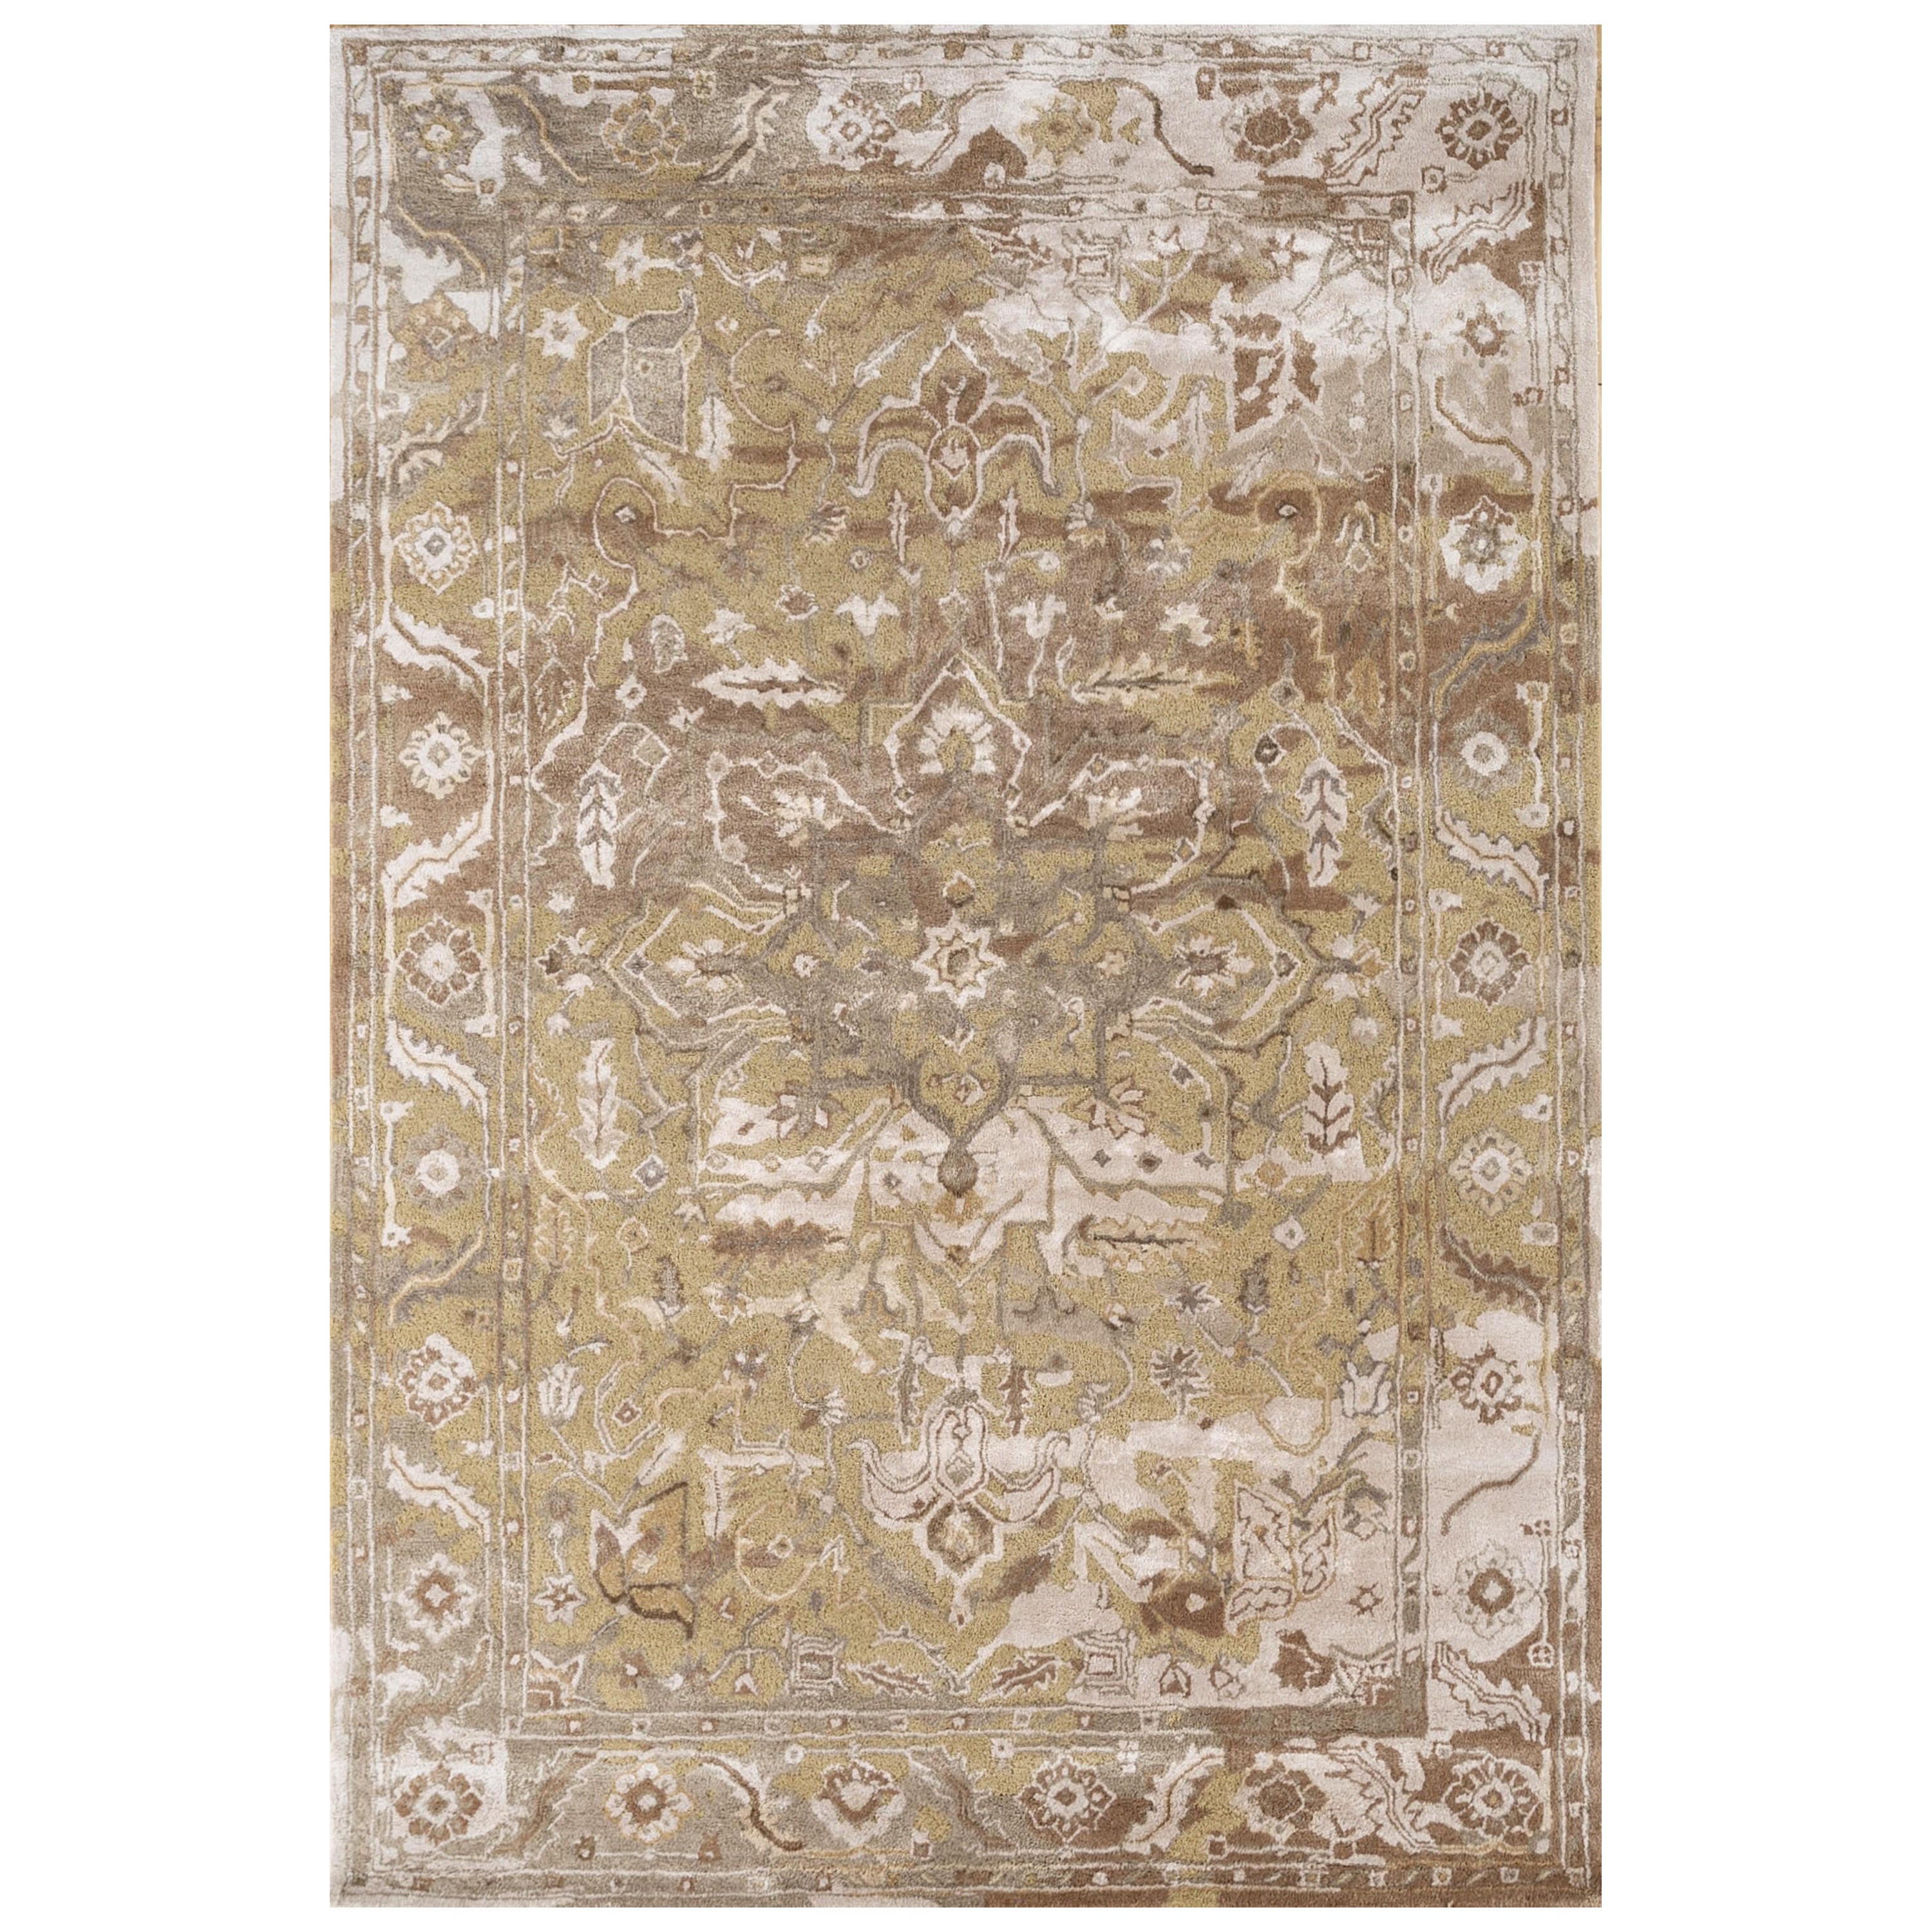 Gleam Grove Antique White Clay 180x270 cm Hand Tufted Rug For Sale